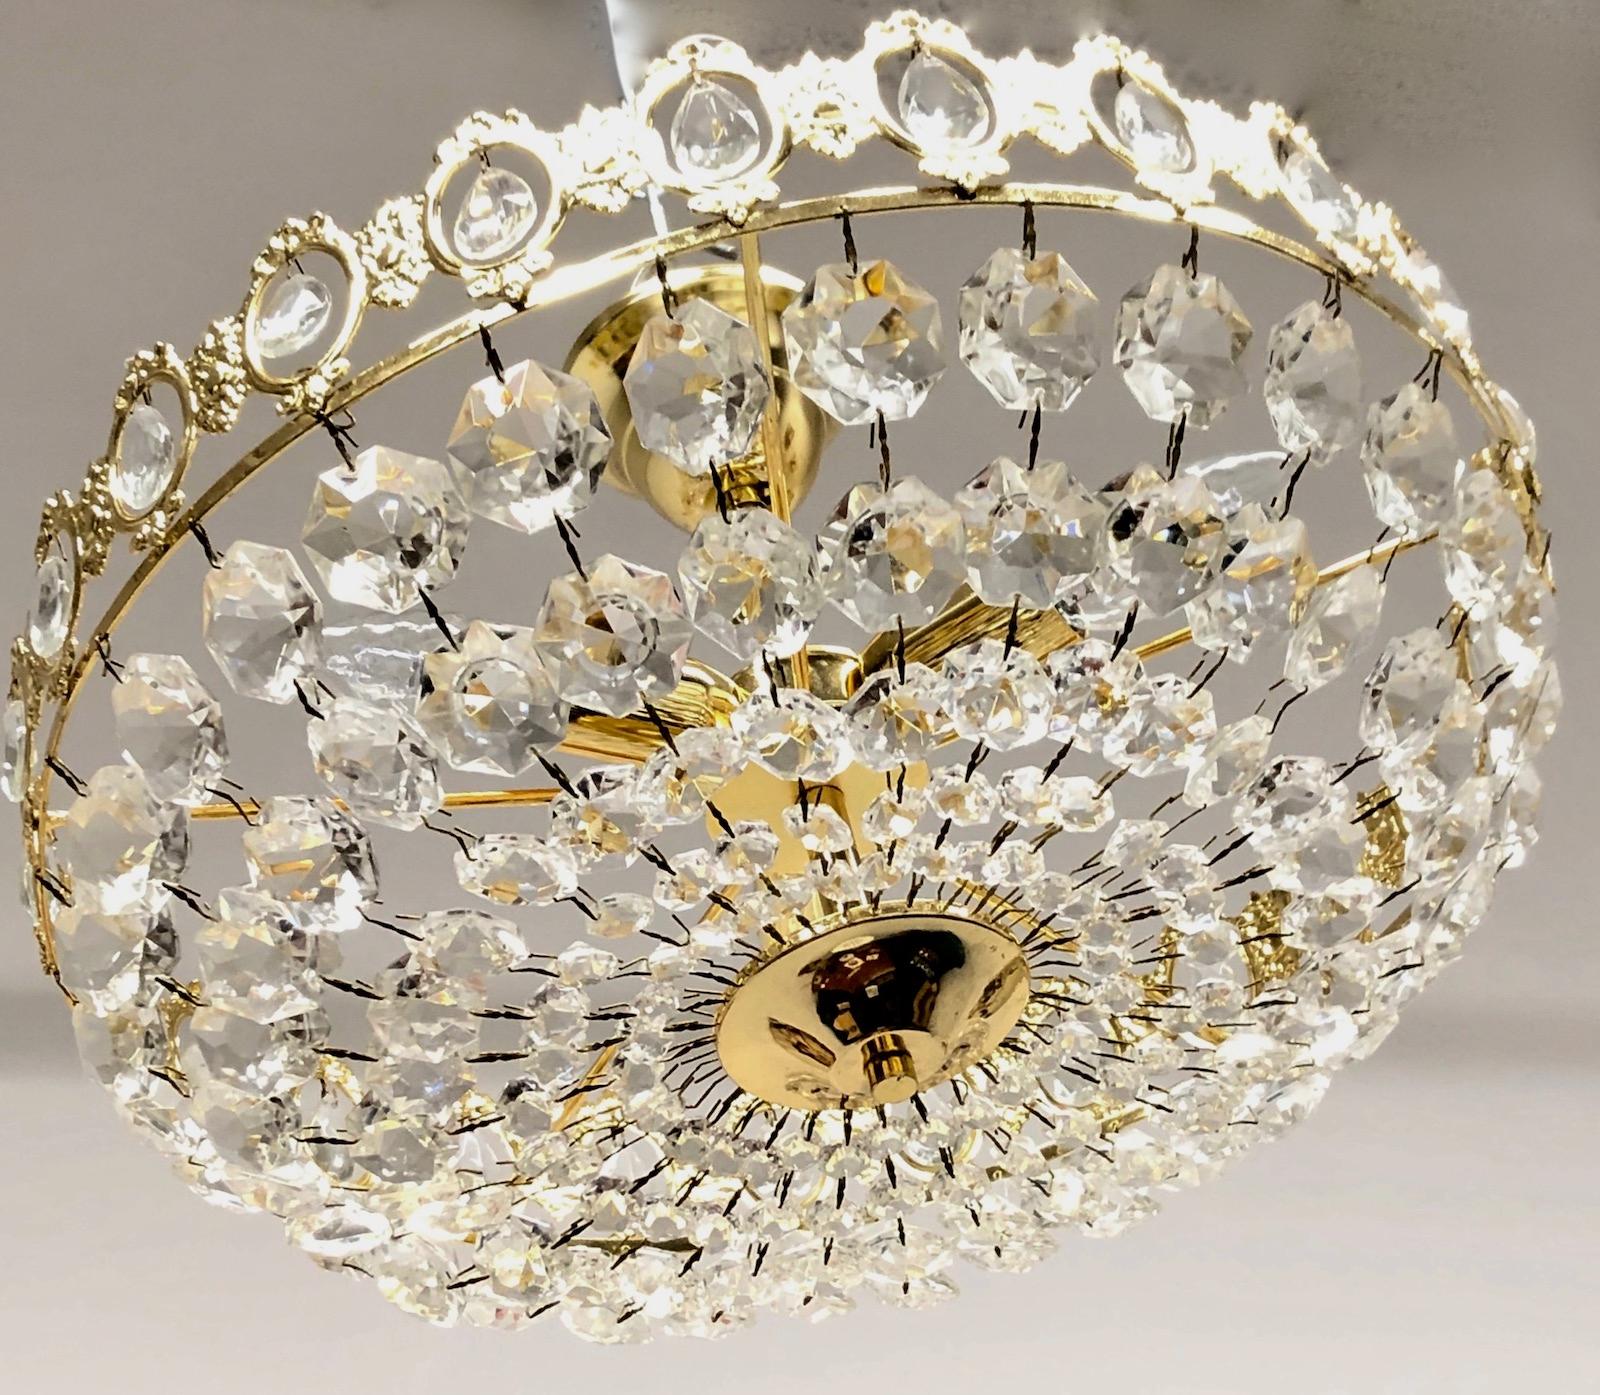 Very rare and beautiful brass and crystal chandelier flush mount attributed to Kolarz Leuchten, Austria, 1970s. The flush mount requires three European E14 candelabra bulbs, each up to 60 watts.